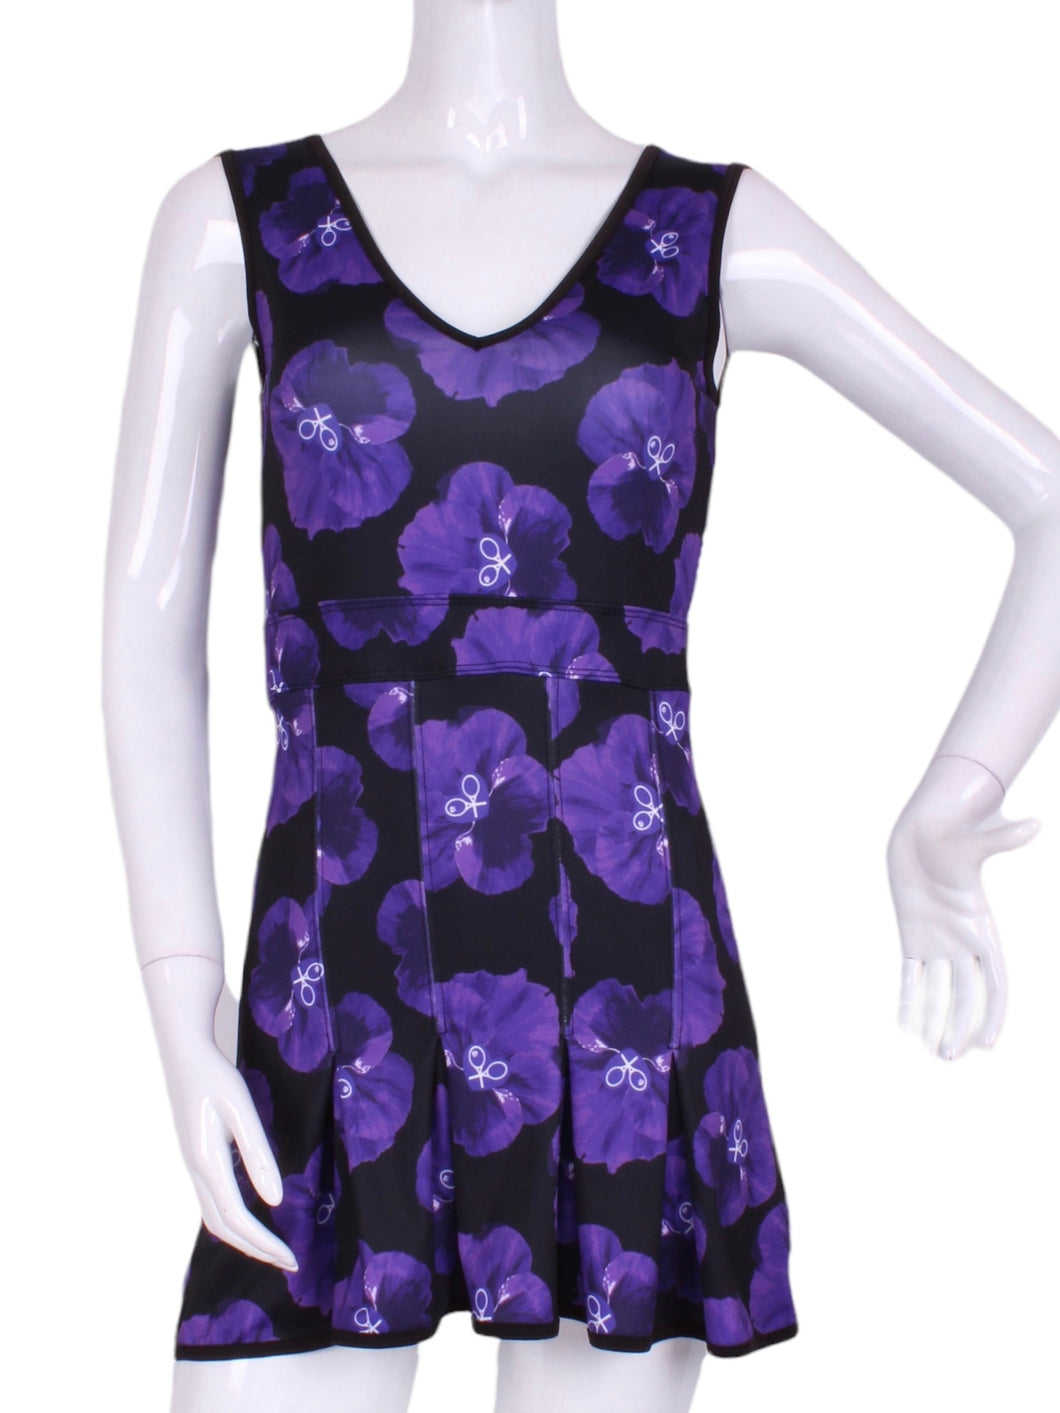 The Angelina Dress is modern yet classy.  This style is in our very limited Purple Pansy print, with a flattering v-neck neckline.  This soft, silky, and sexy tennis dress has an empire waist and a feminine skirt.